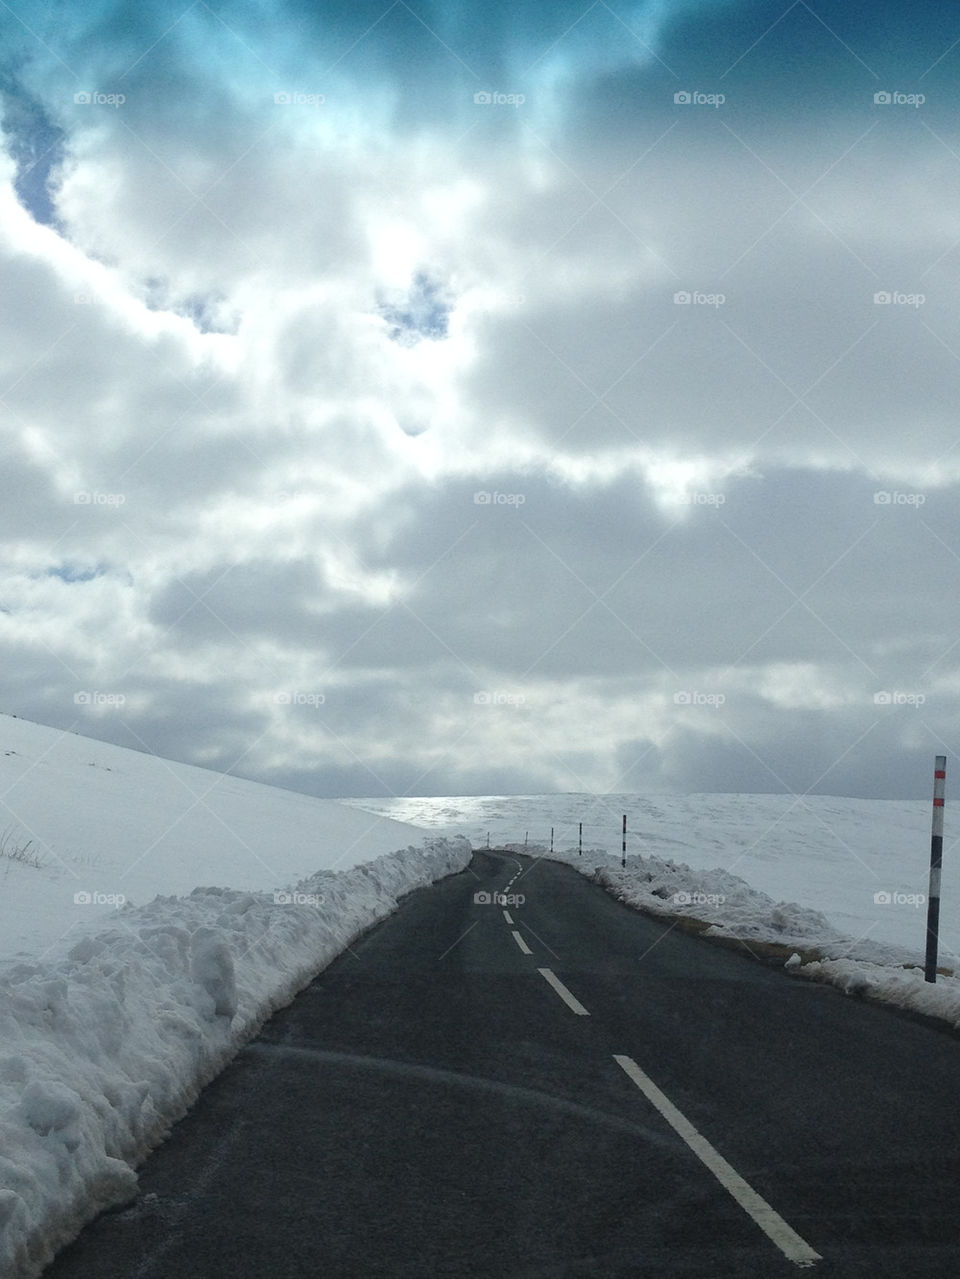 snow road april weardale by dramaqueenz